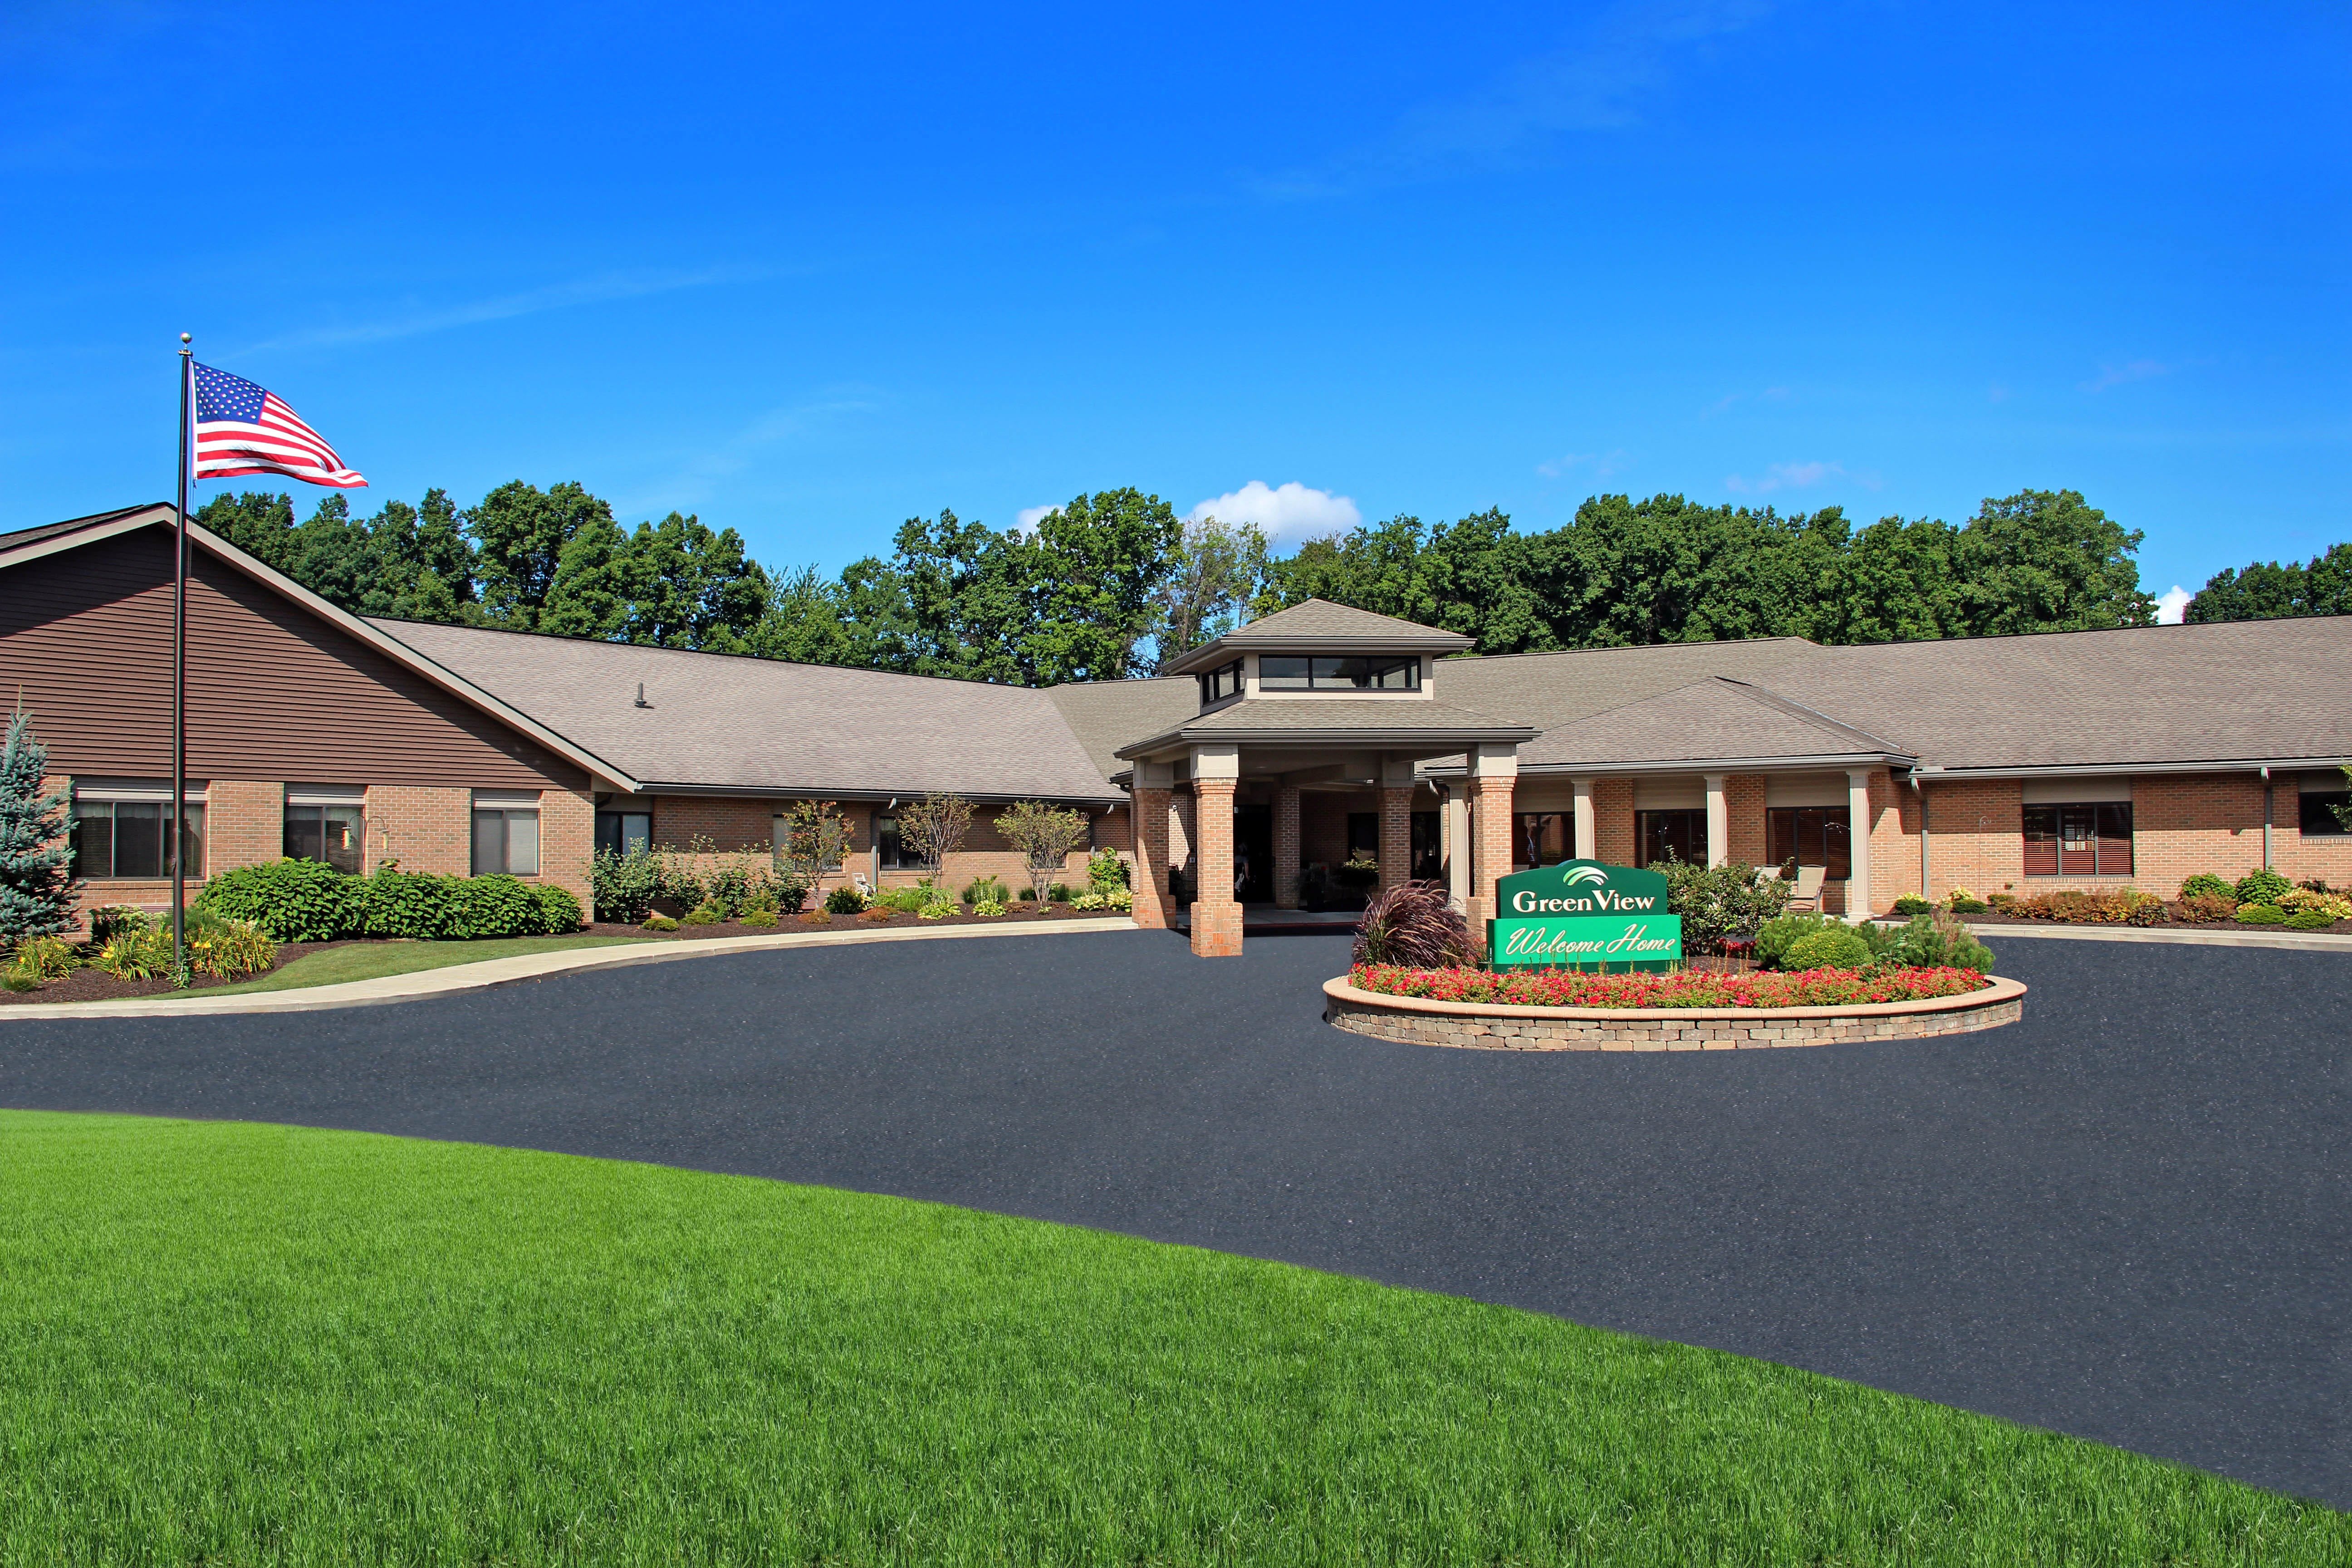 GreenView Assisted Living